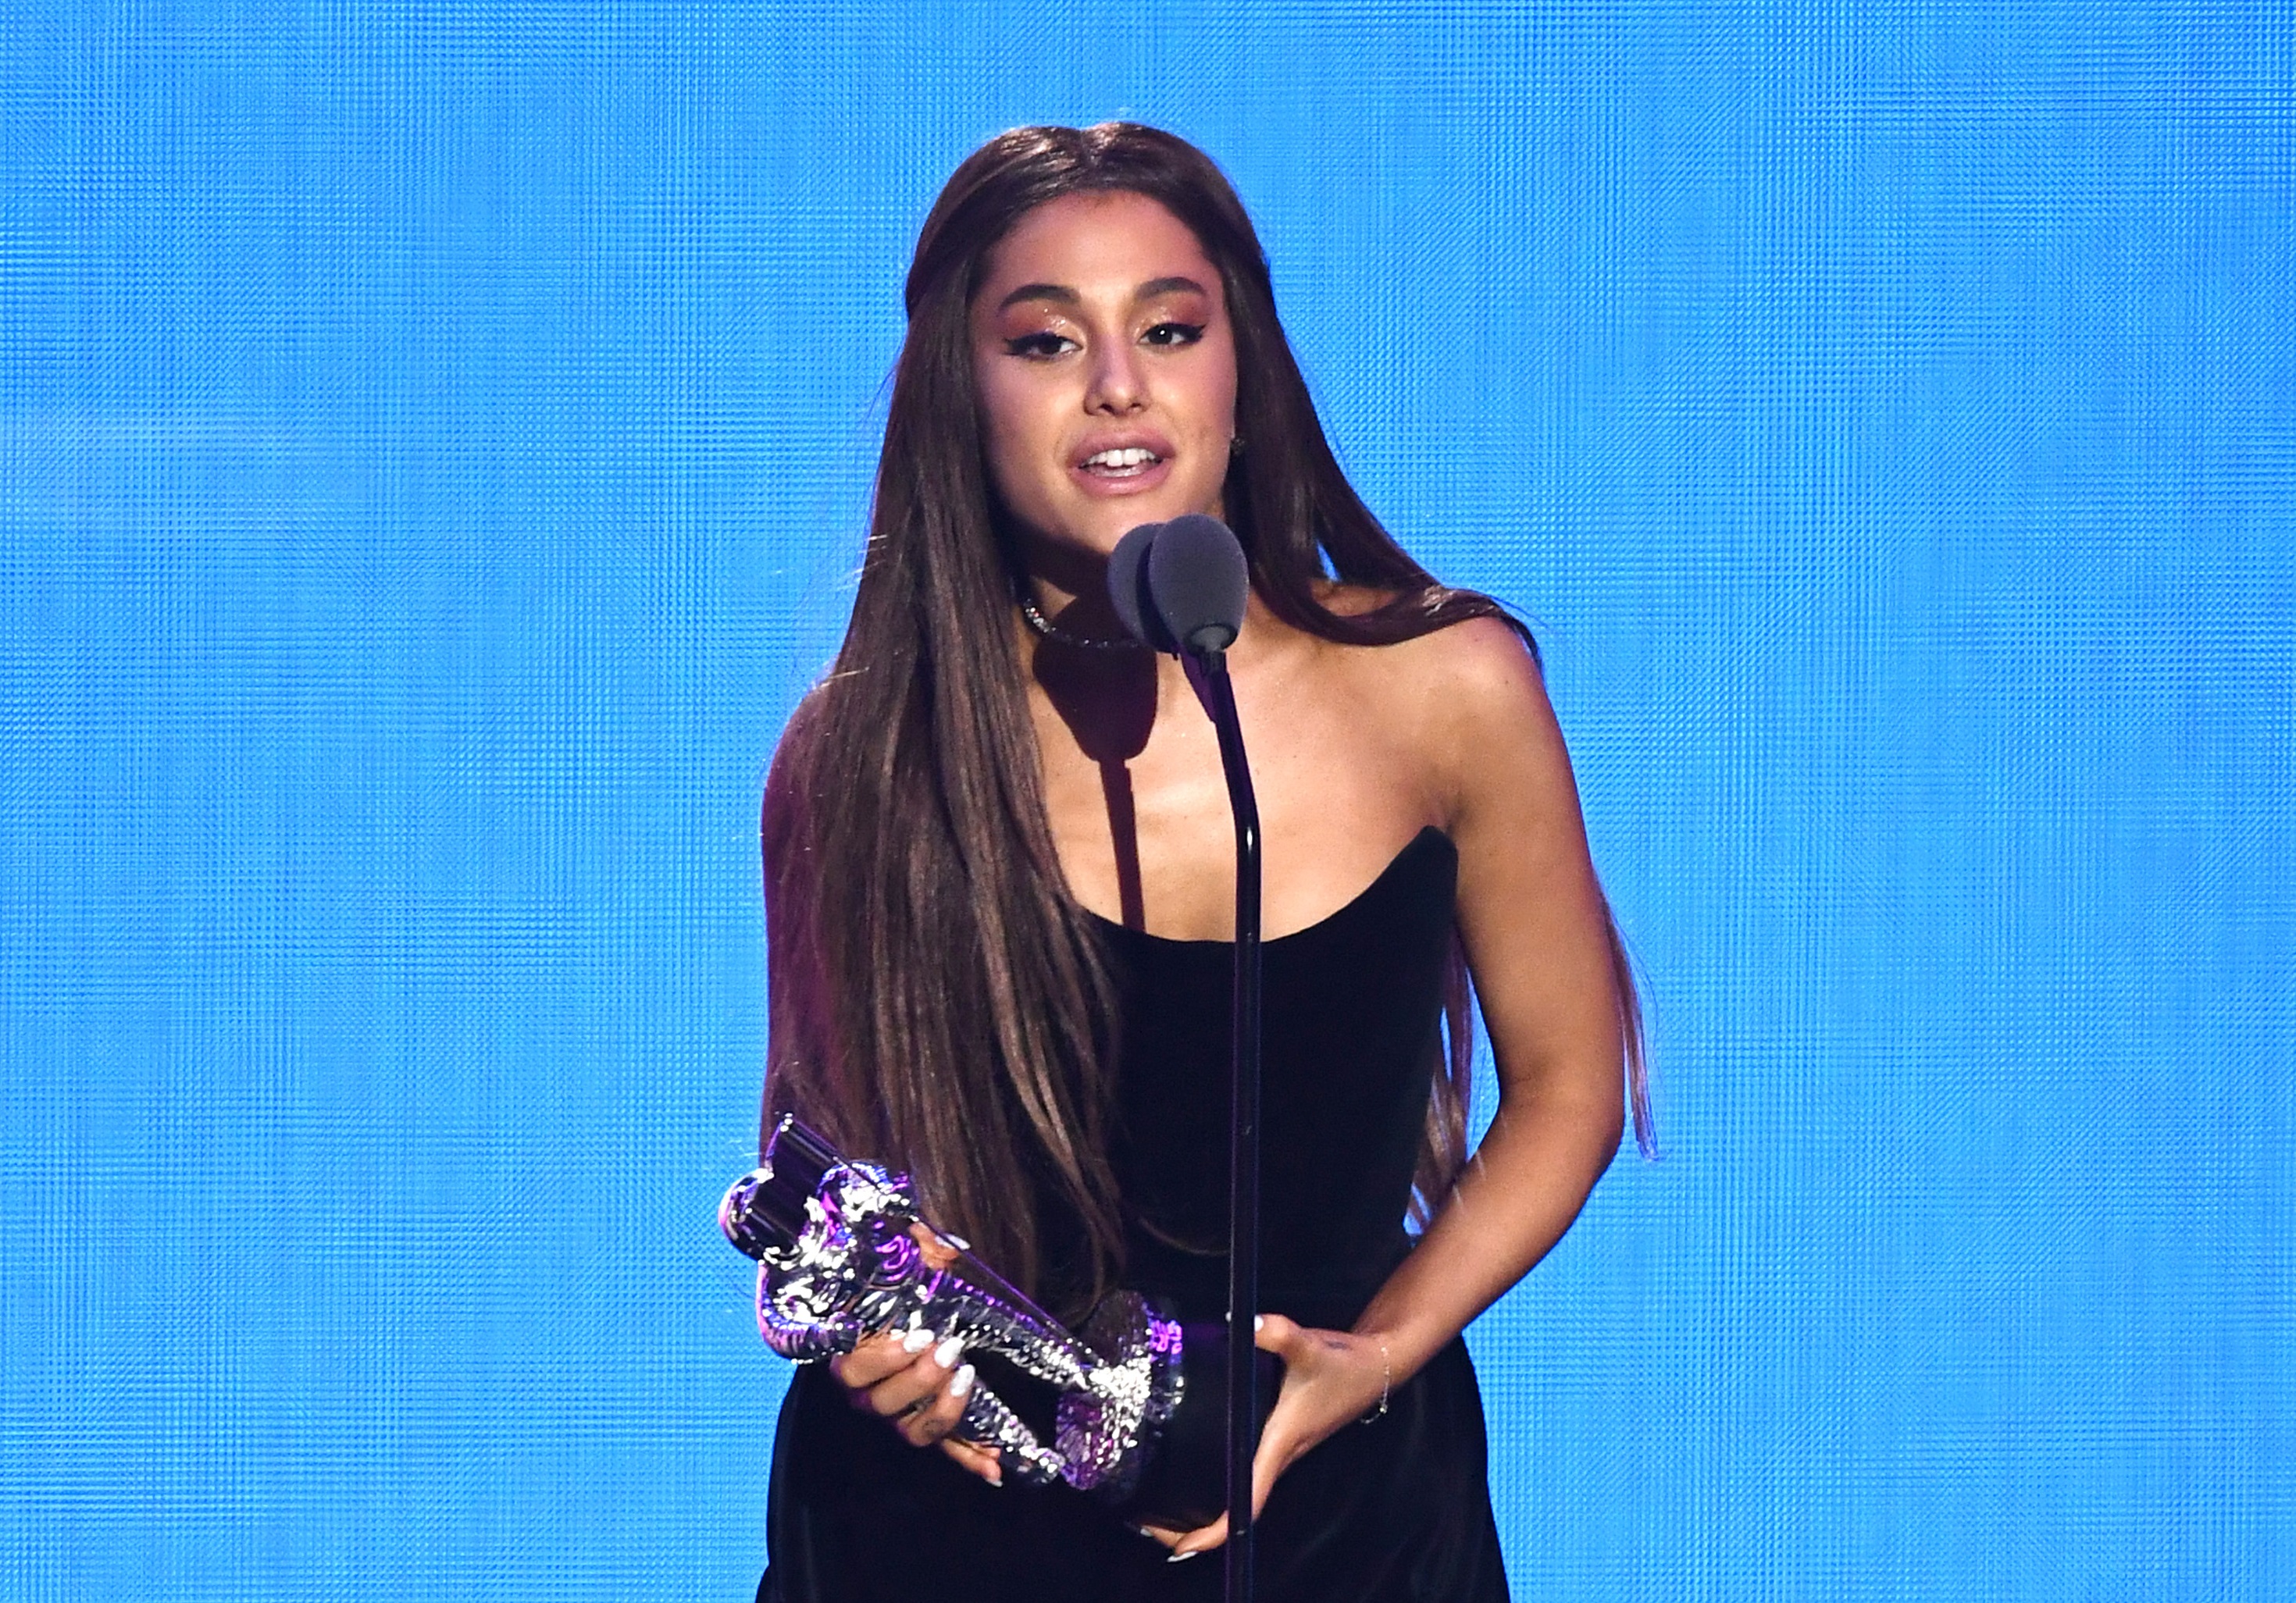 Ariana Grande accepts the award for Best Pop Video onstage during the 2018 MTV Video Music Awards on August 20, 2018 in New York City.